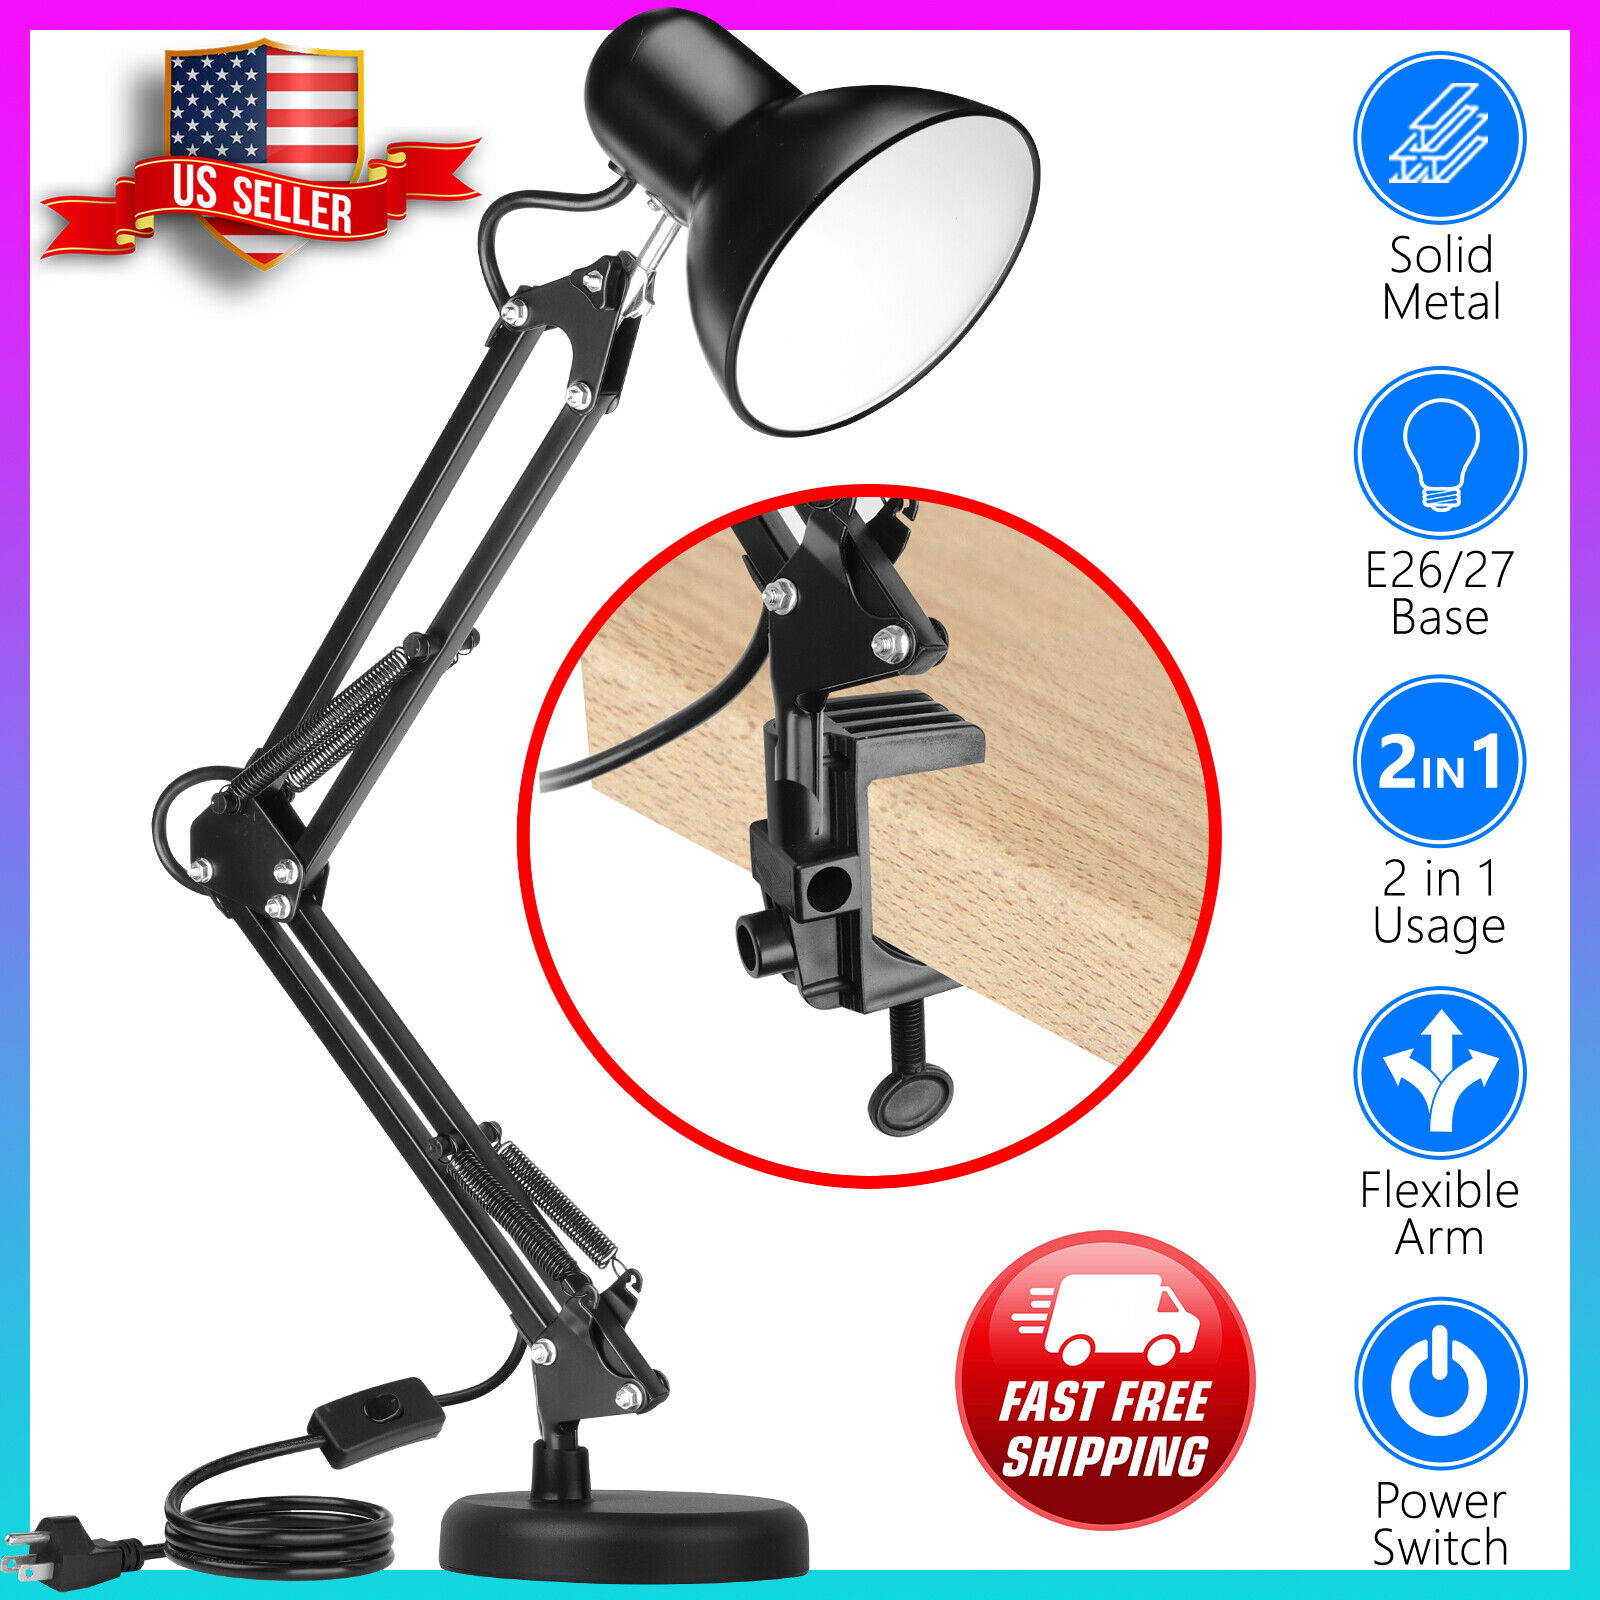 Adjustable Swing Arm Desk Lamp  Table Lamp with Interchangeable Base Or Clamp